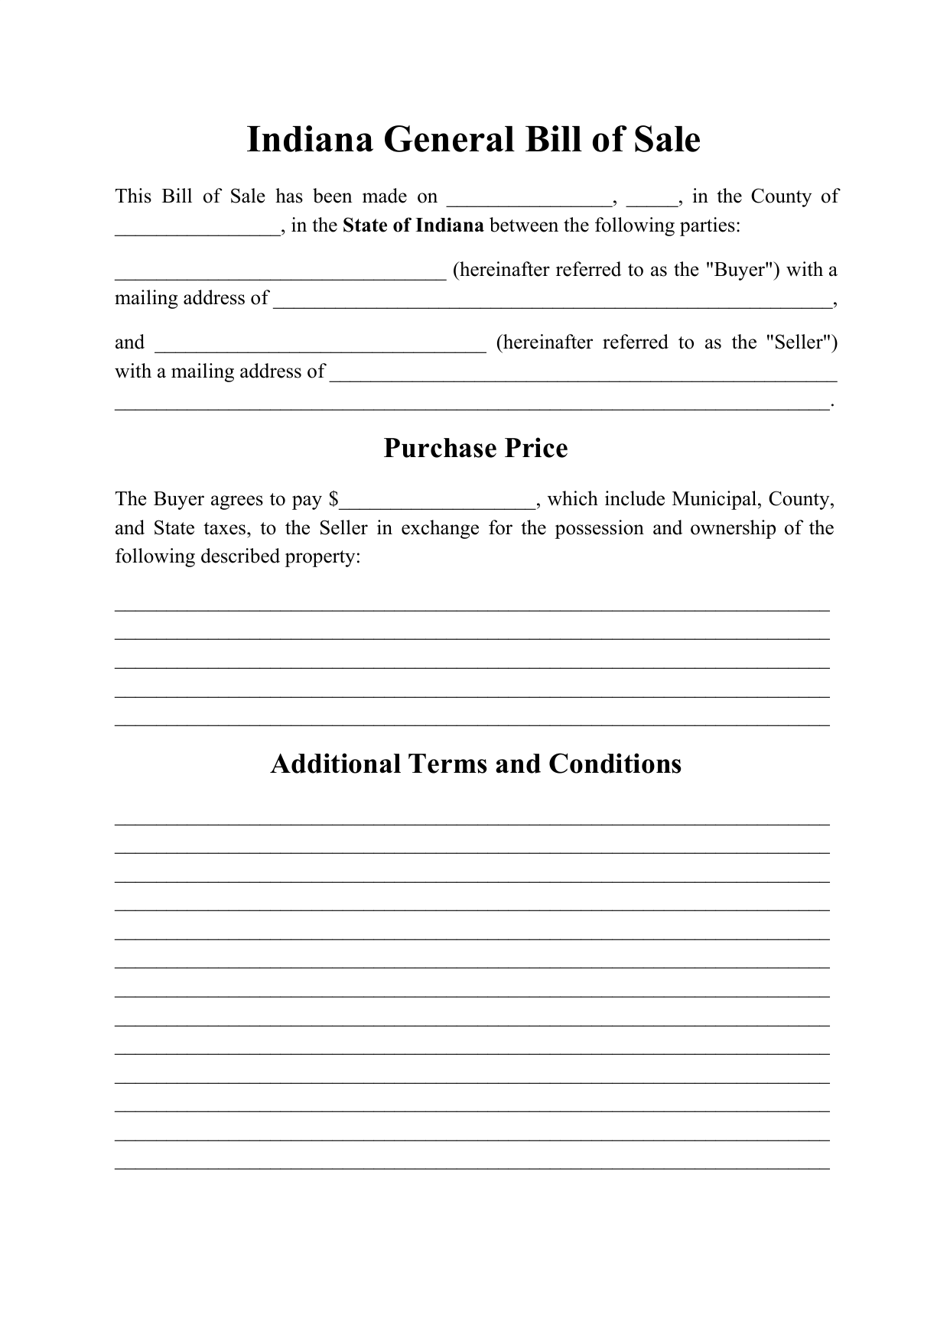 Generic Bill of Sale Form - Indiana, Page 1